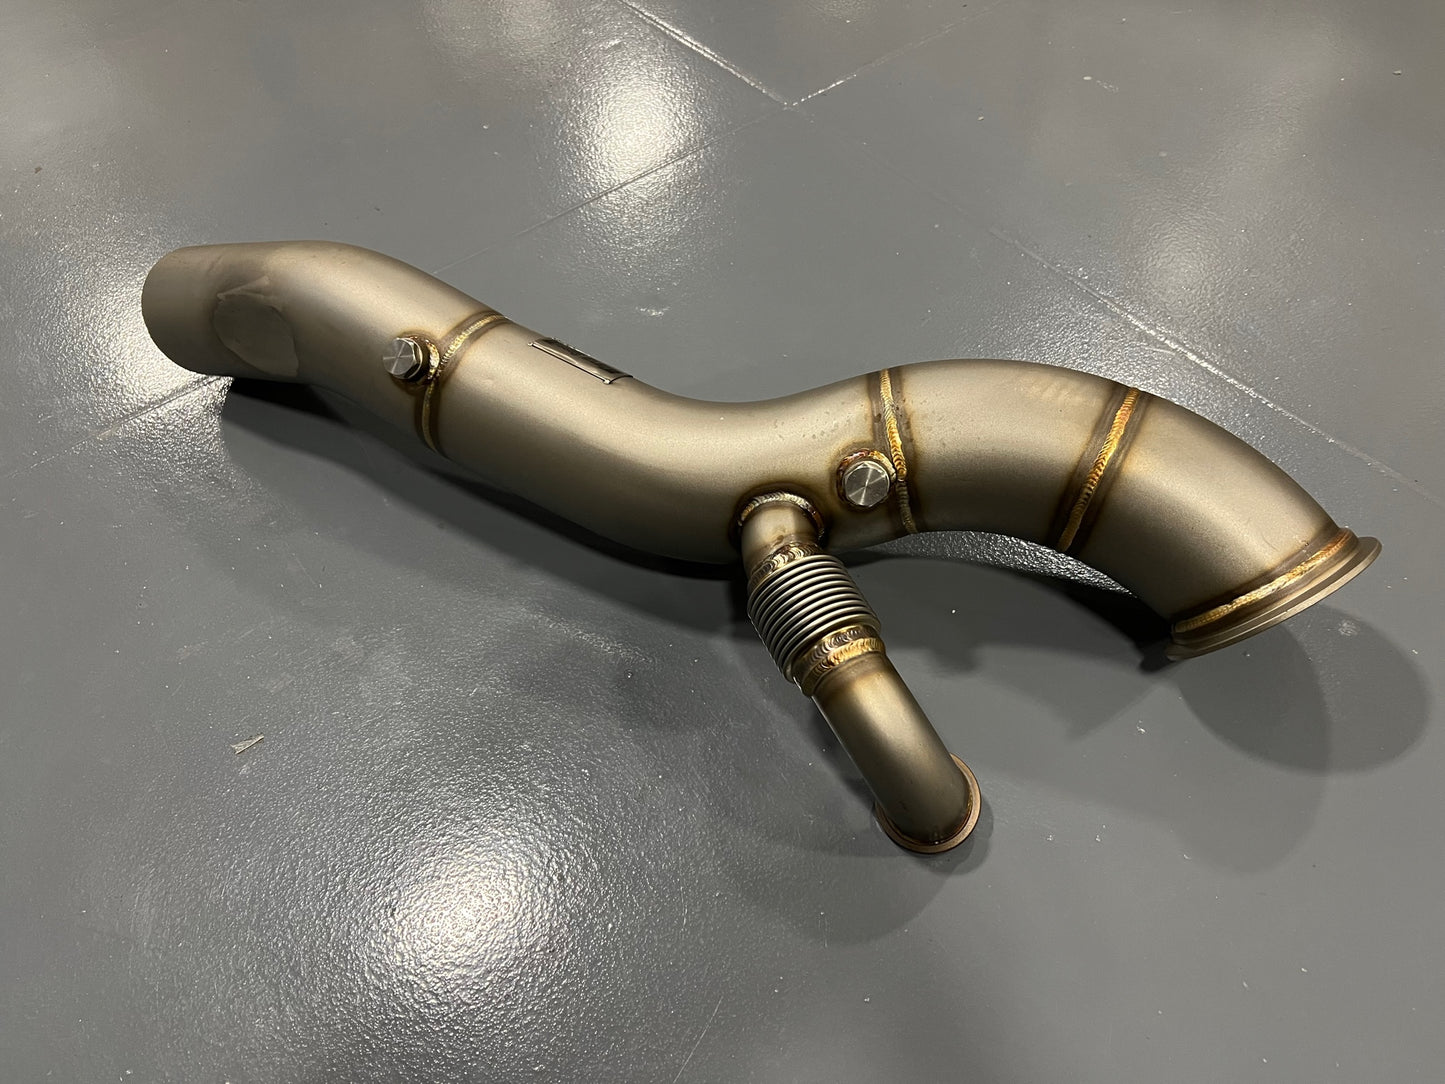 Huron Speed Truck T4 4" Downpipe for 1.25 Housings